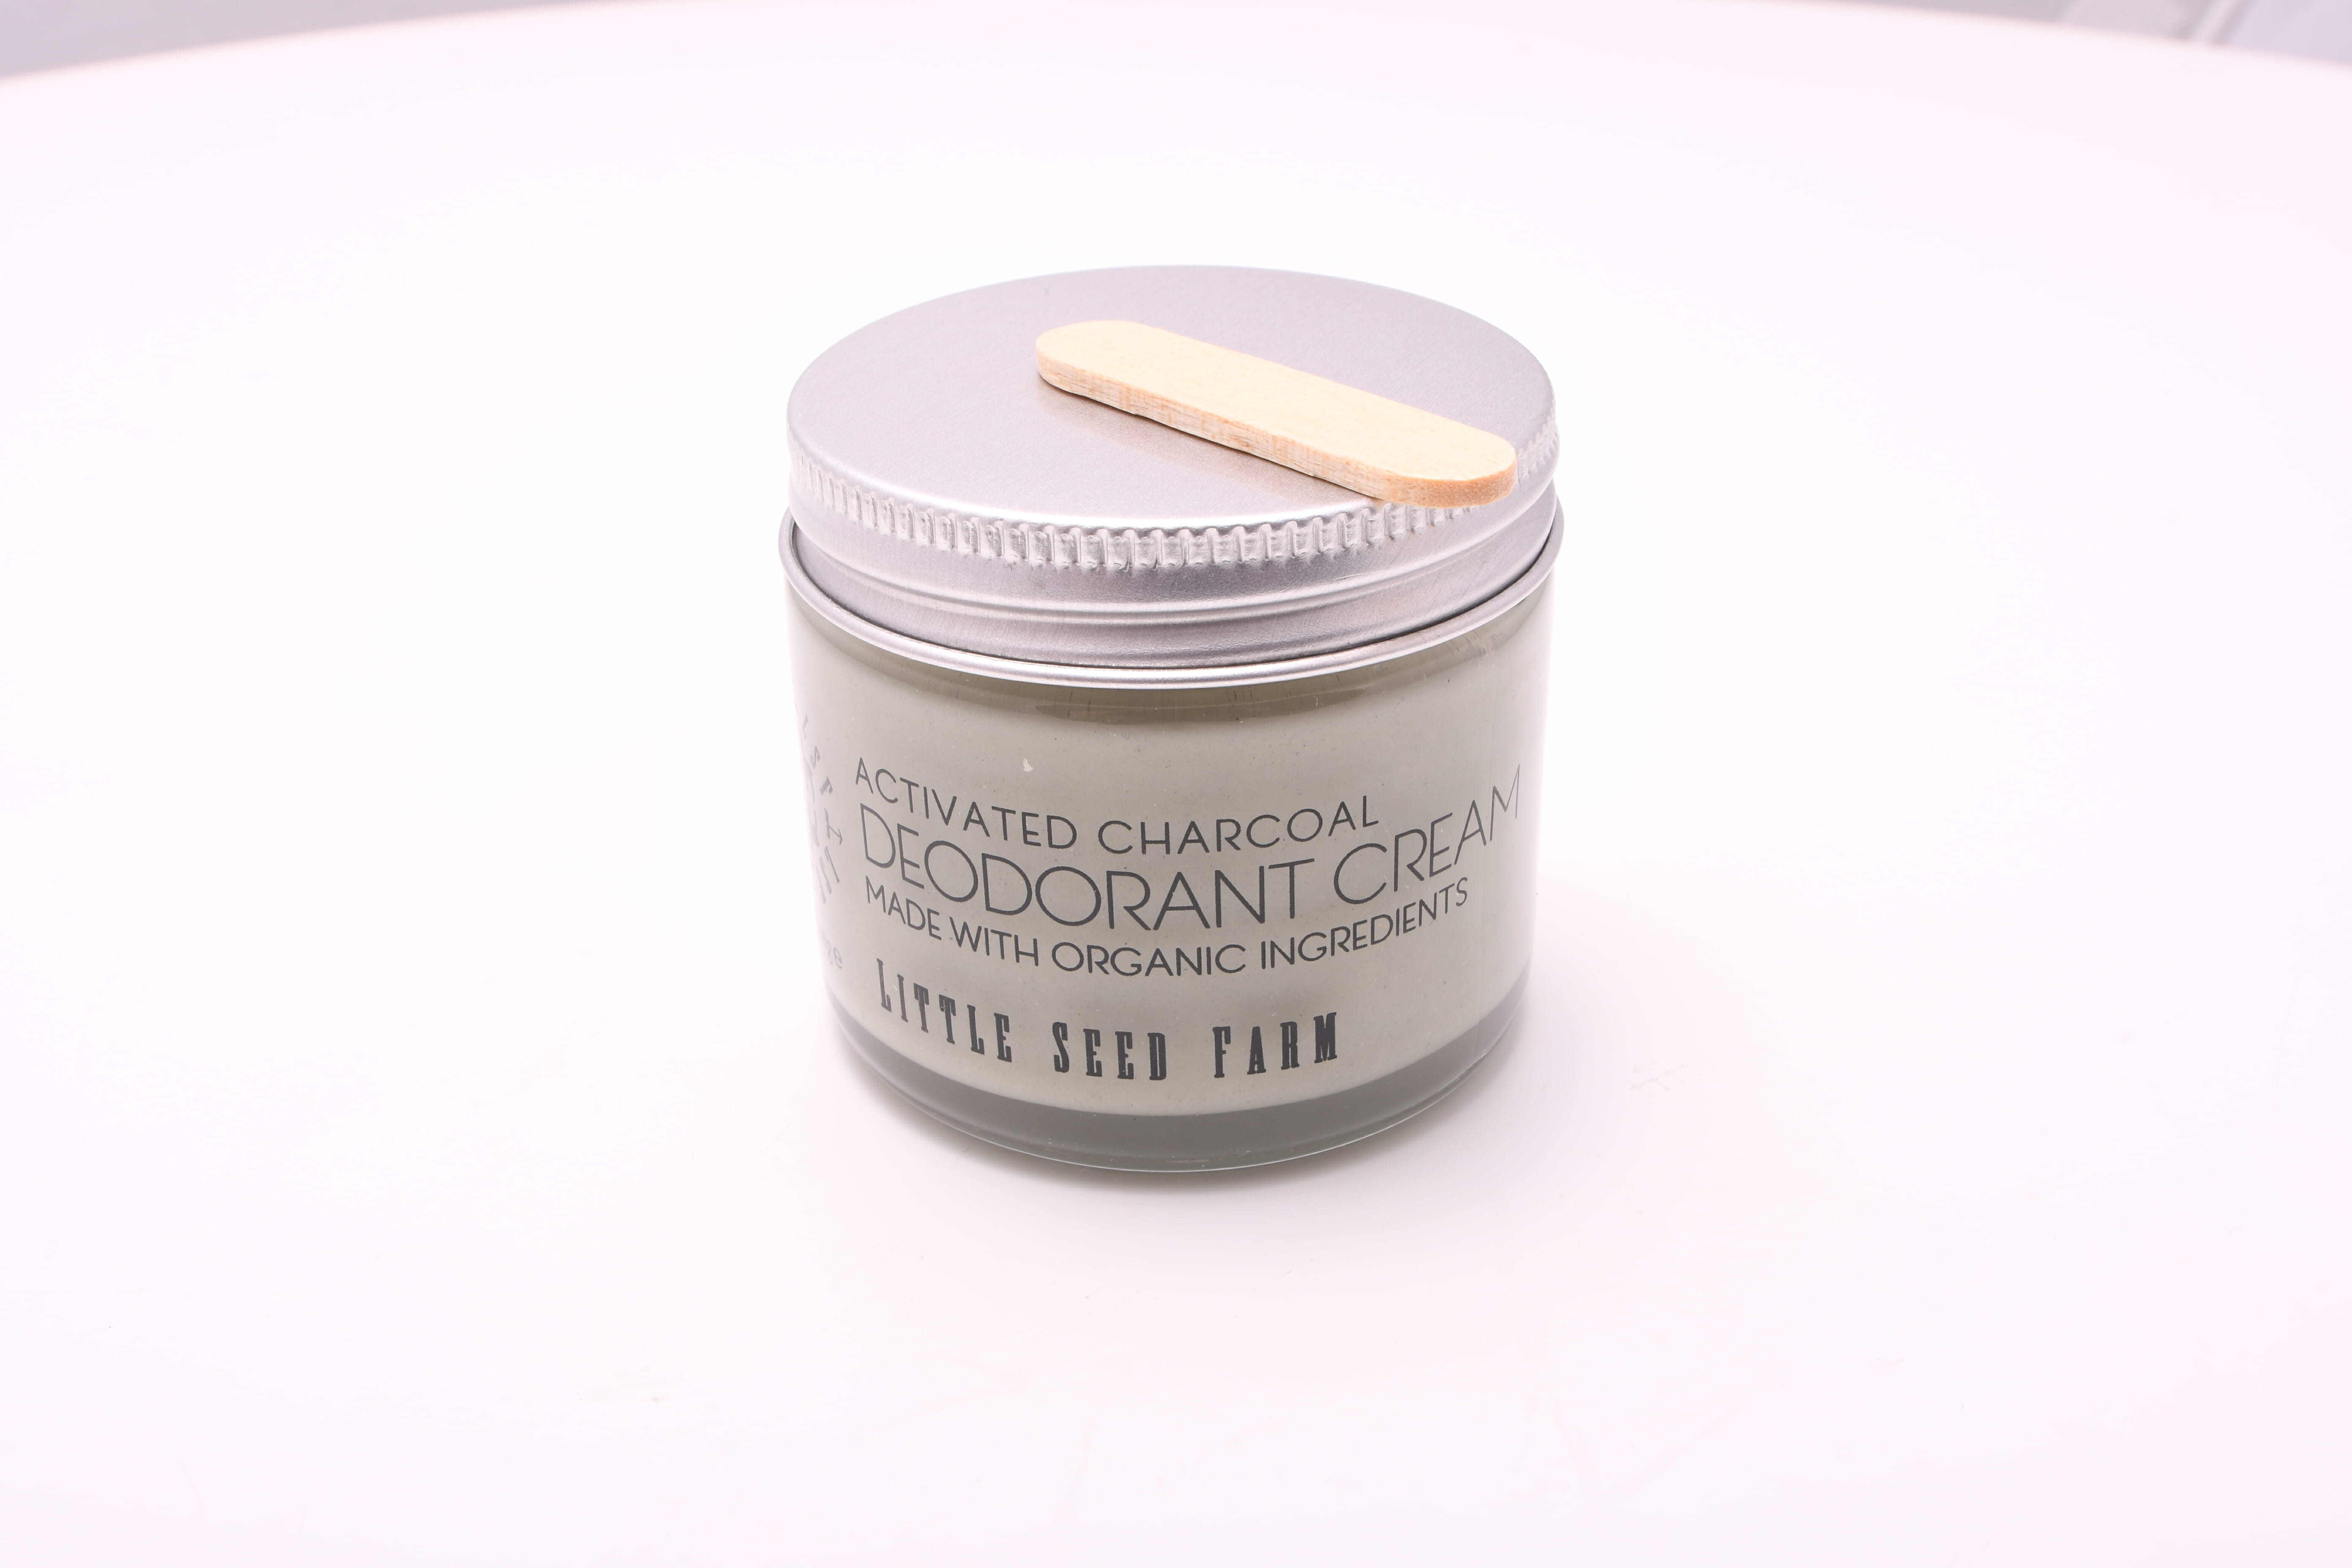 A jar of cream deodorant, made with activated charcoal and applied with the small wooden applicator.